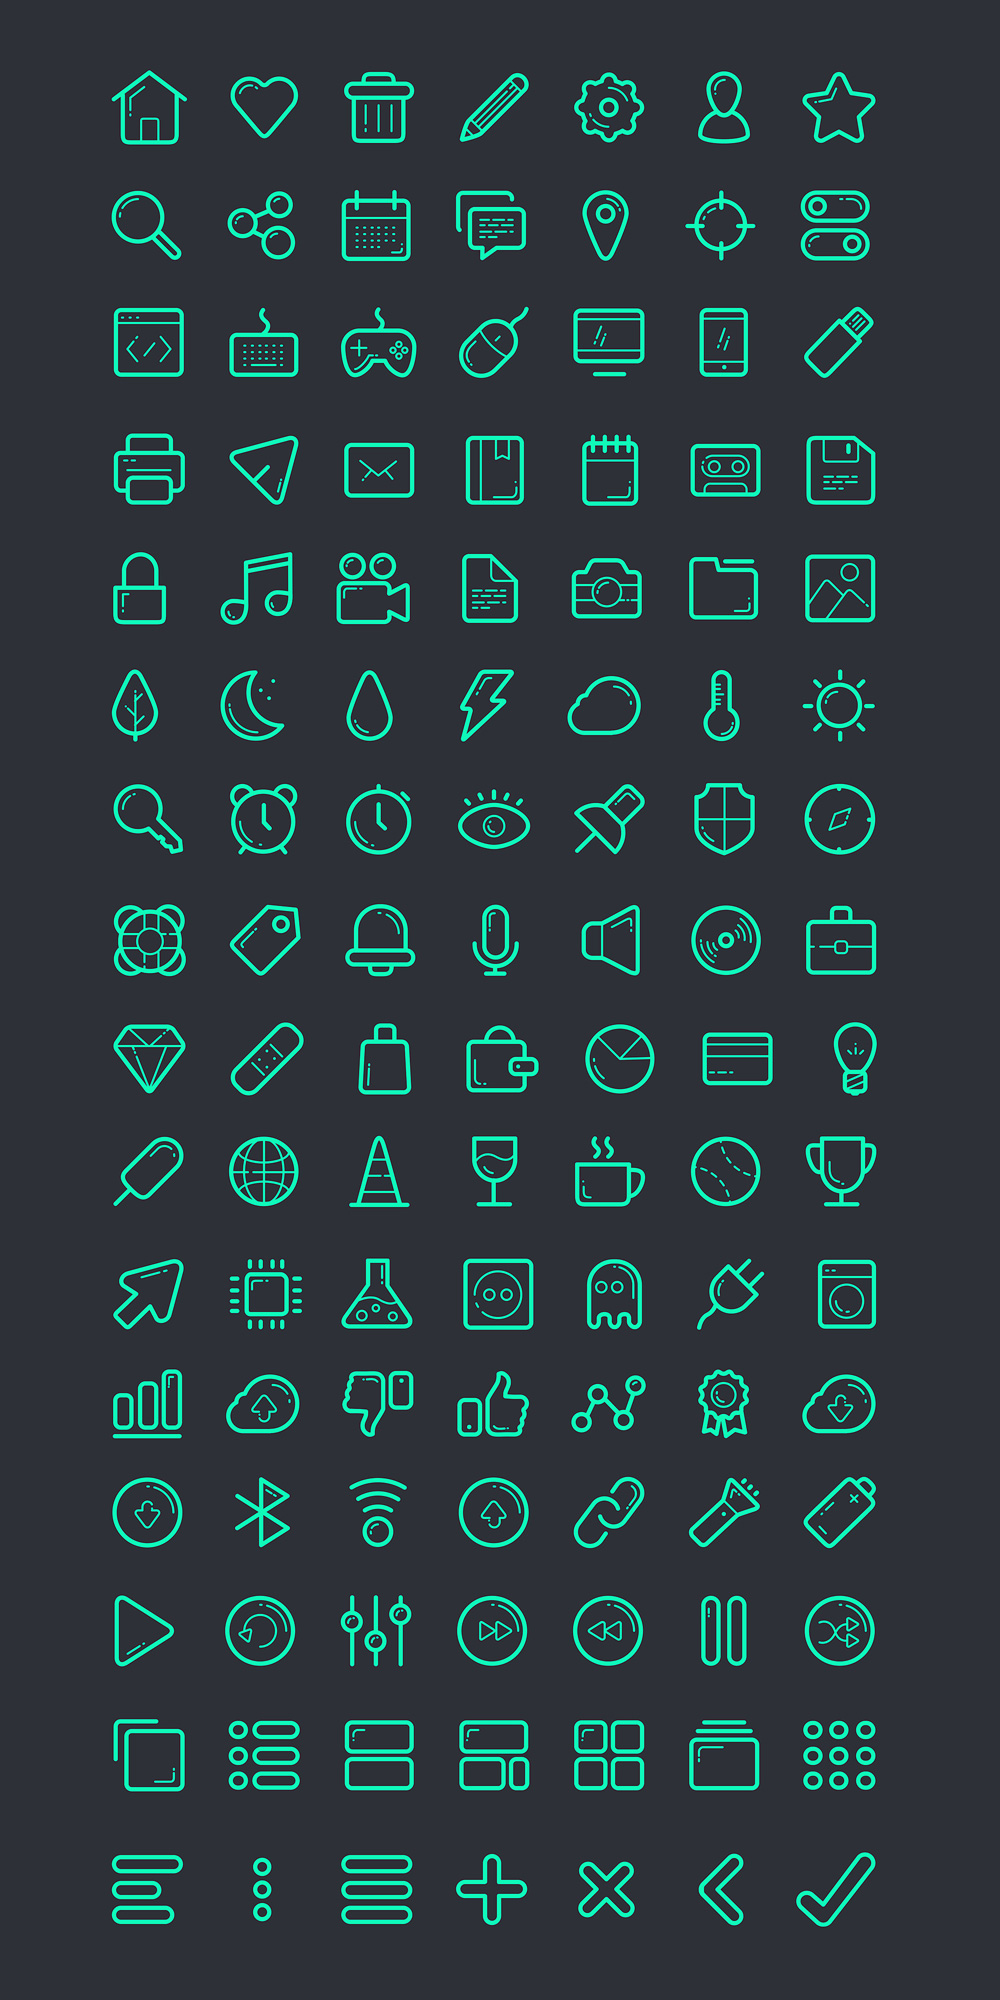 112-free-vector-icons